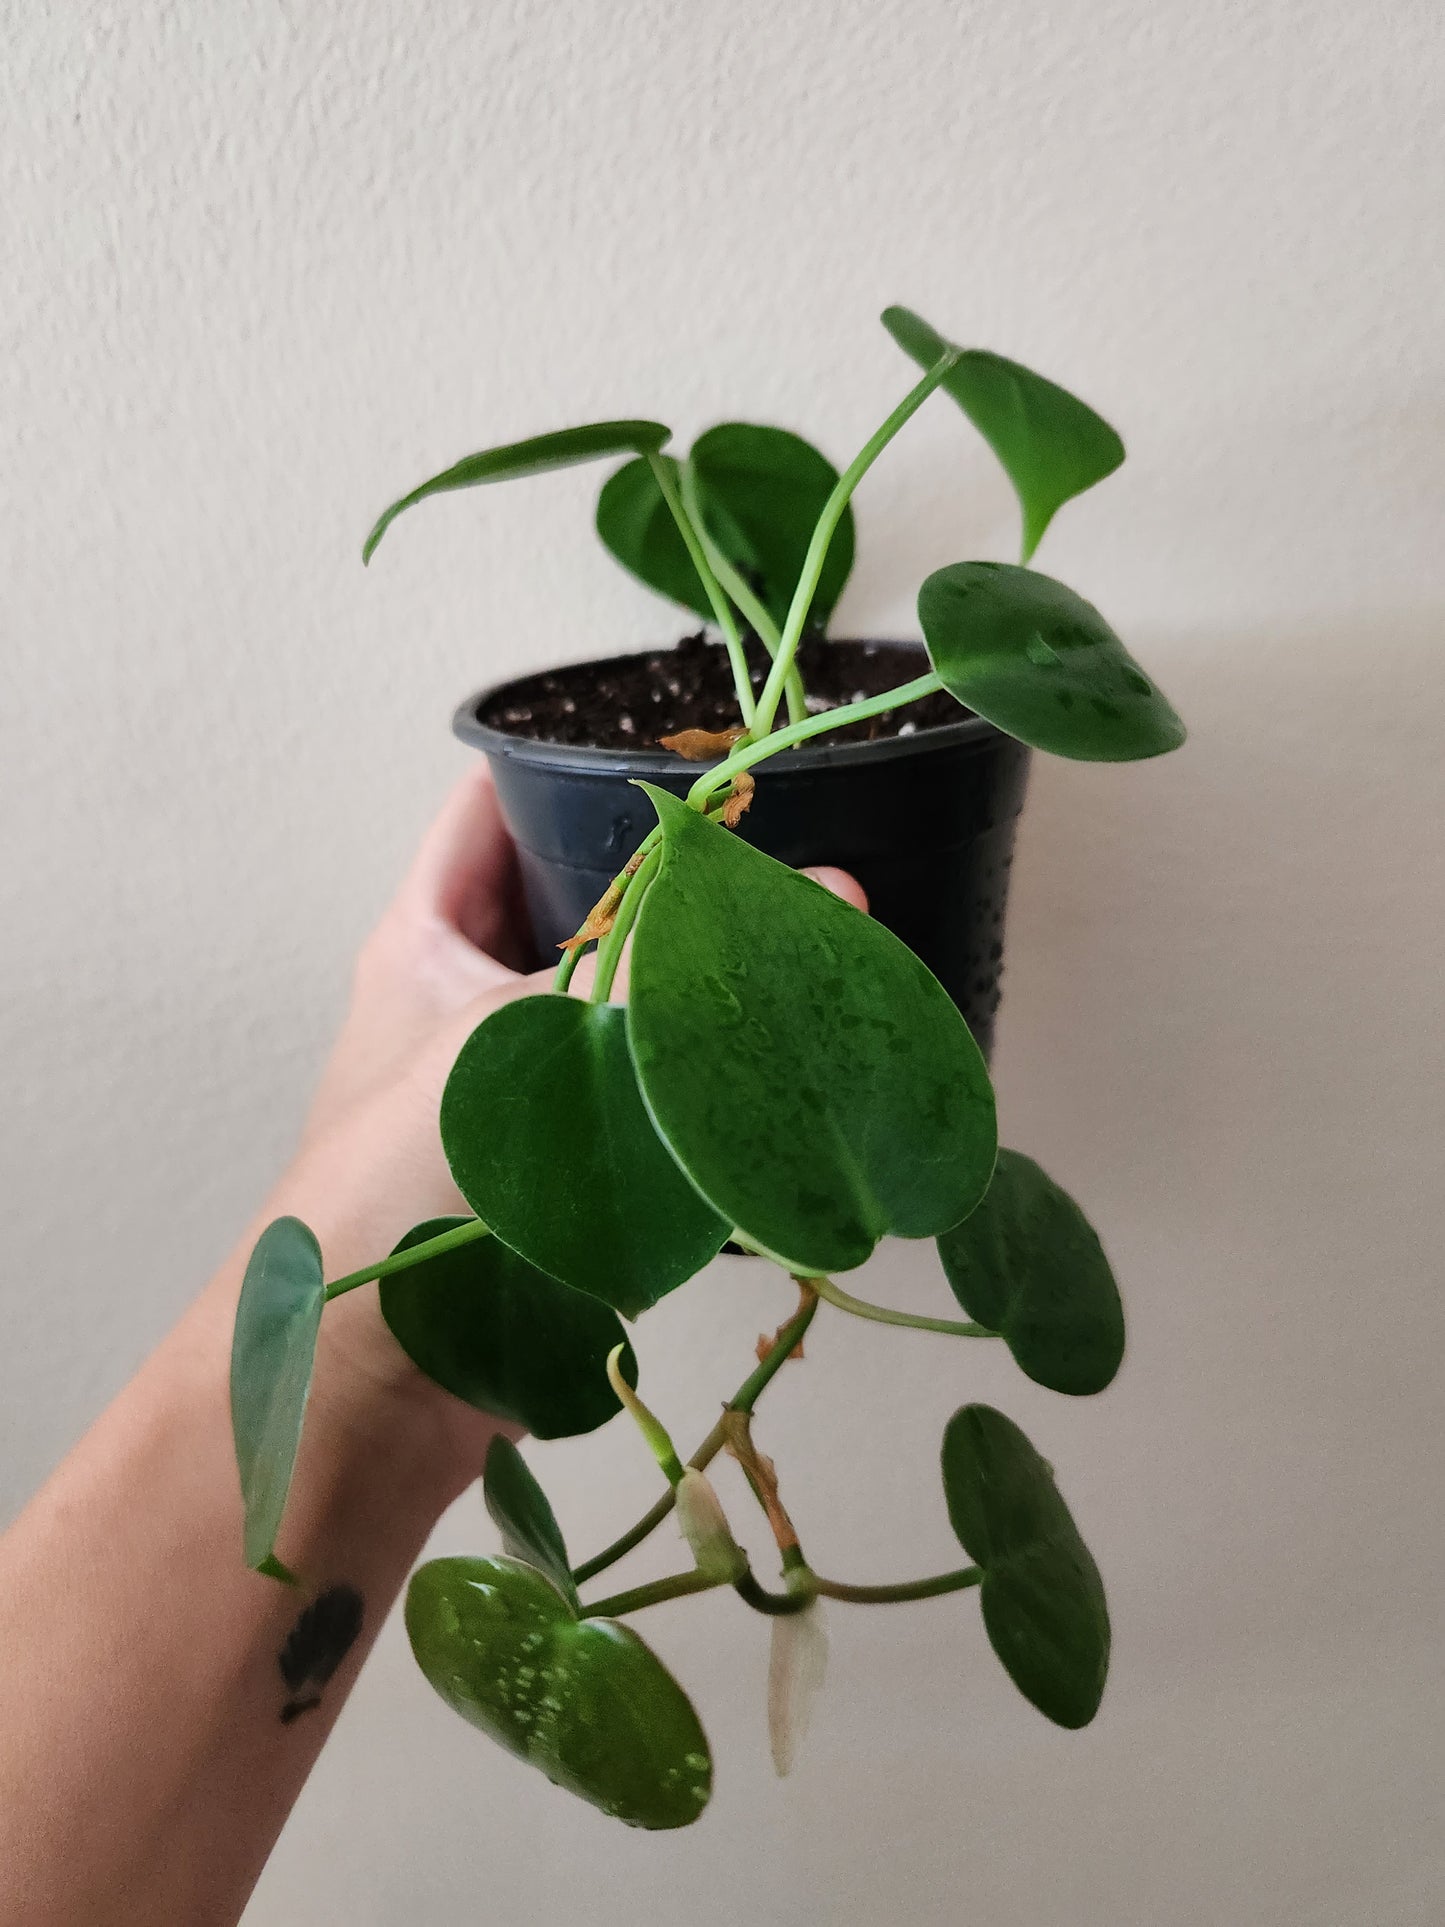 Heart Leaf Philodendron Plant